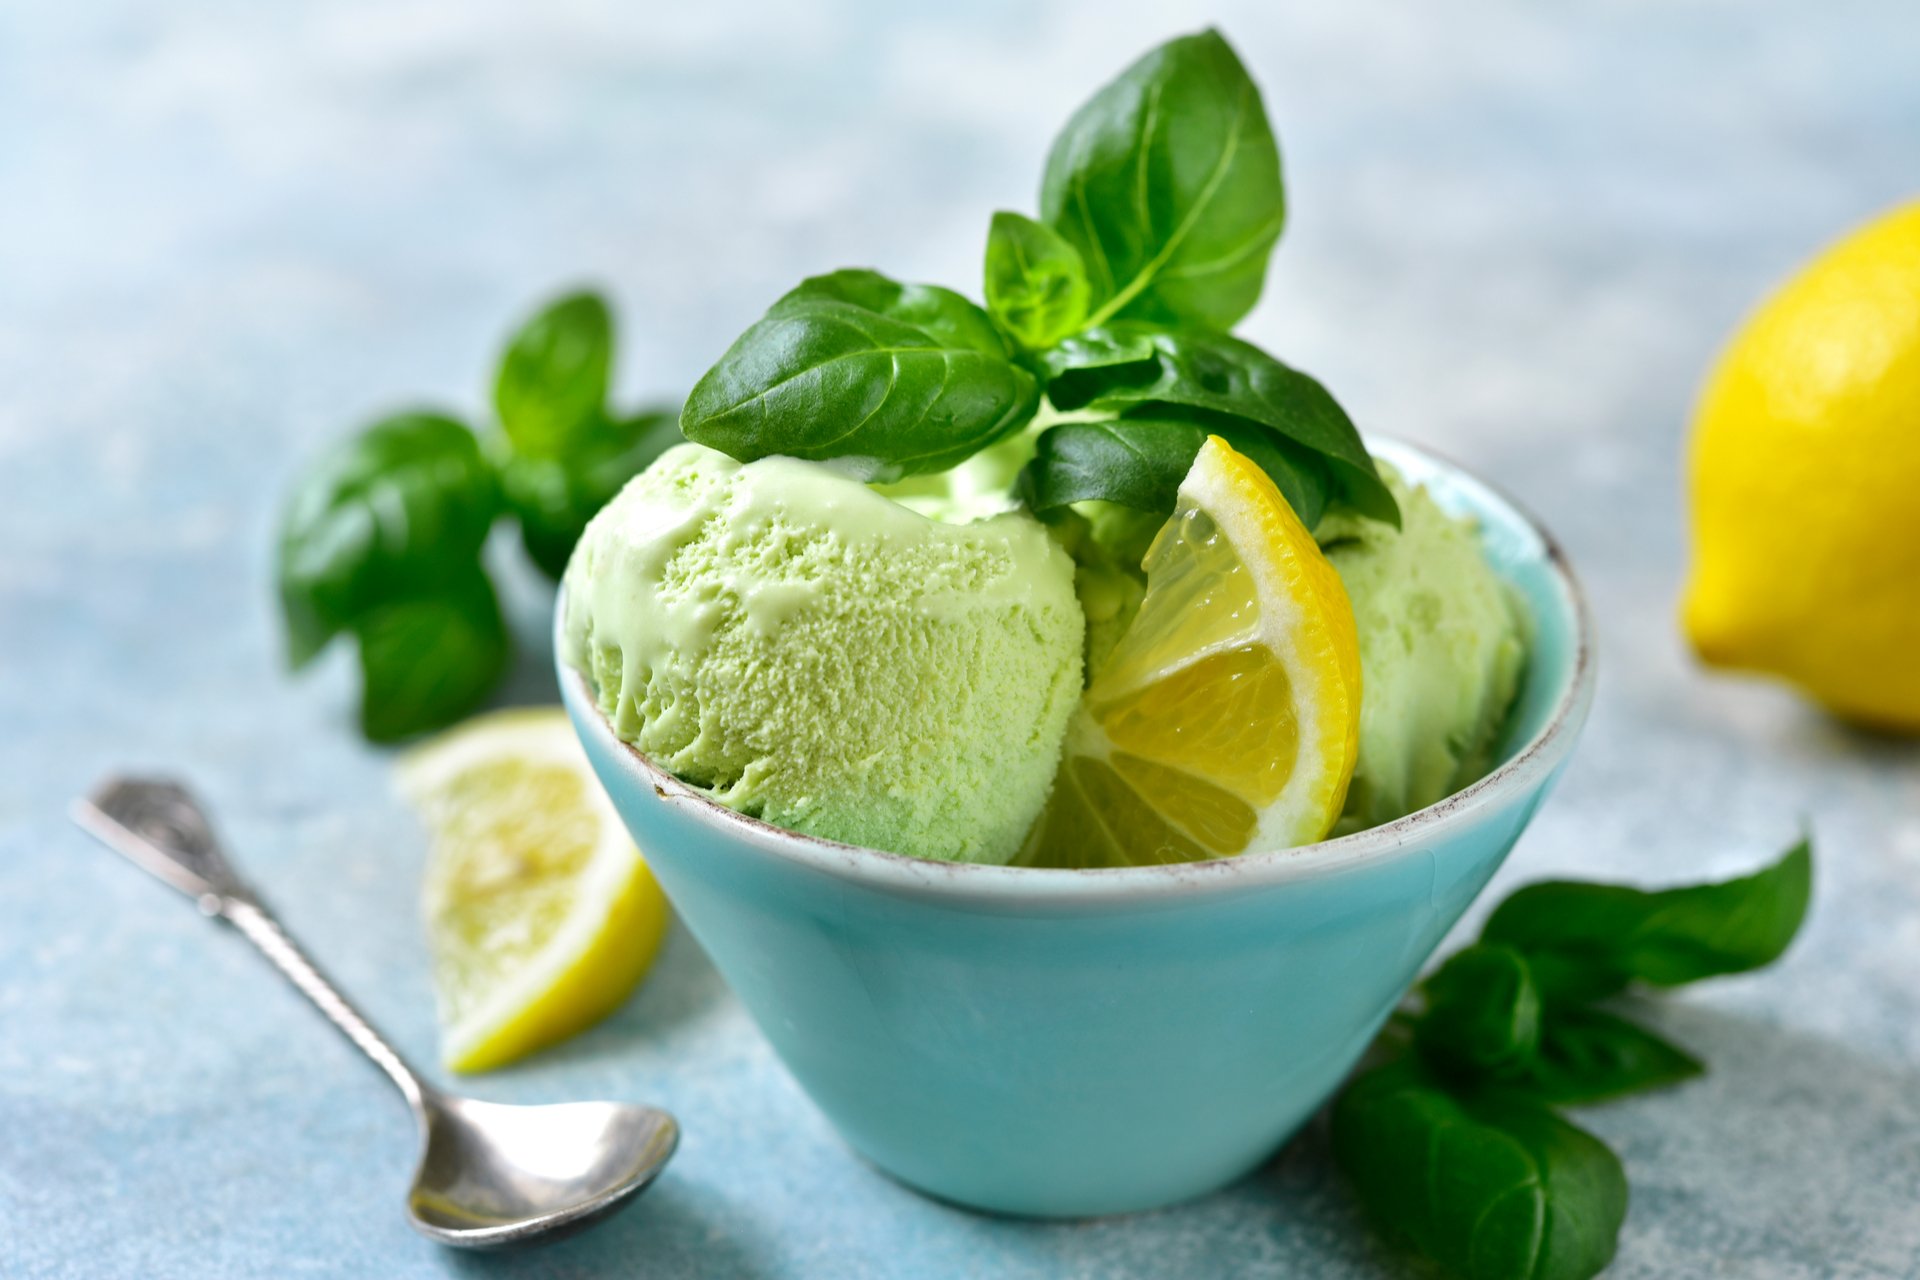 Basil adds&nbsp;an elegant flavour to sorbets and ice cream.